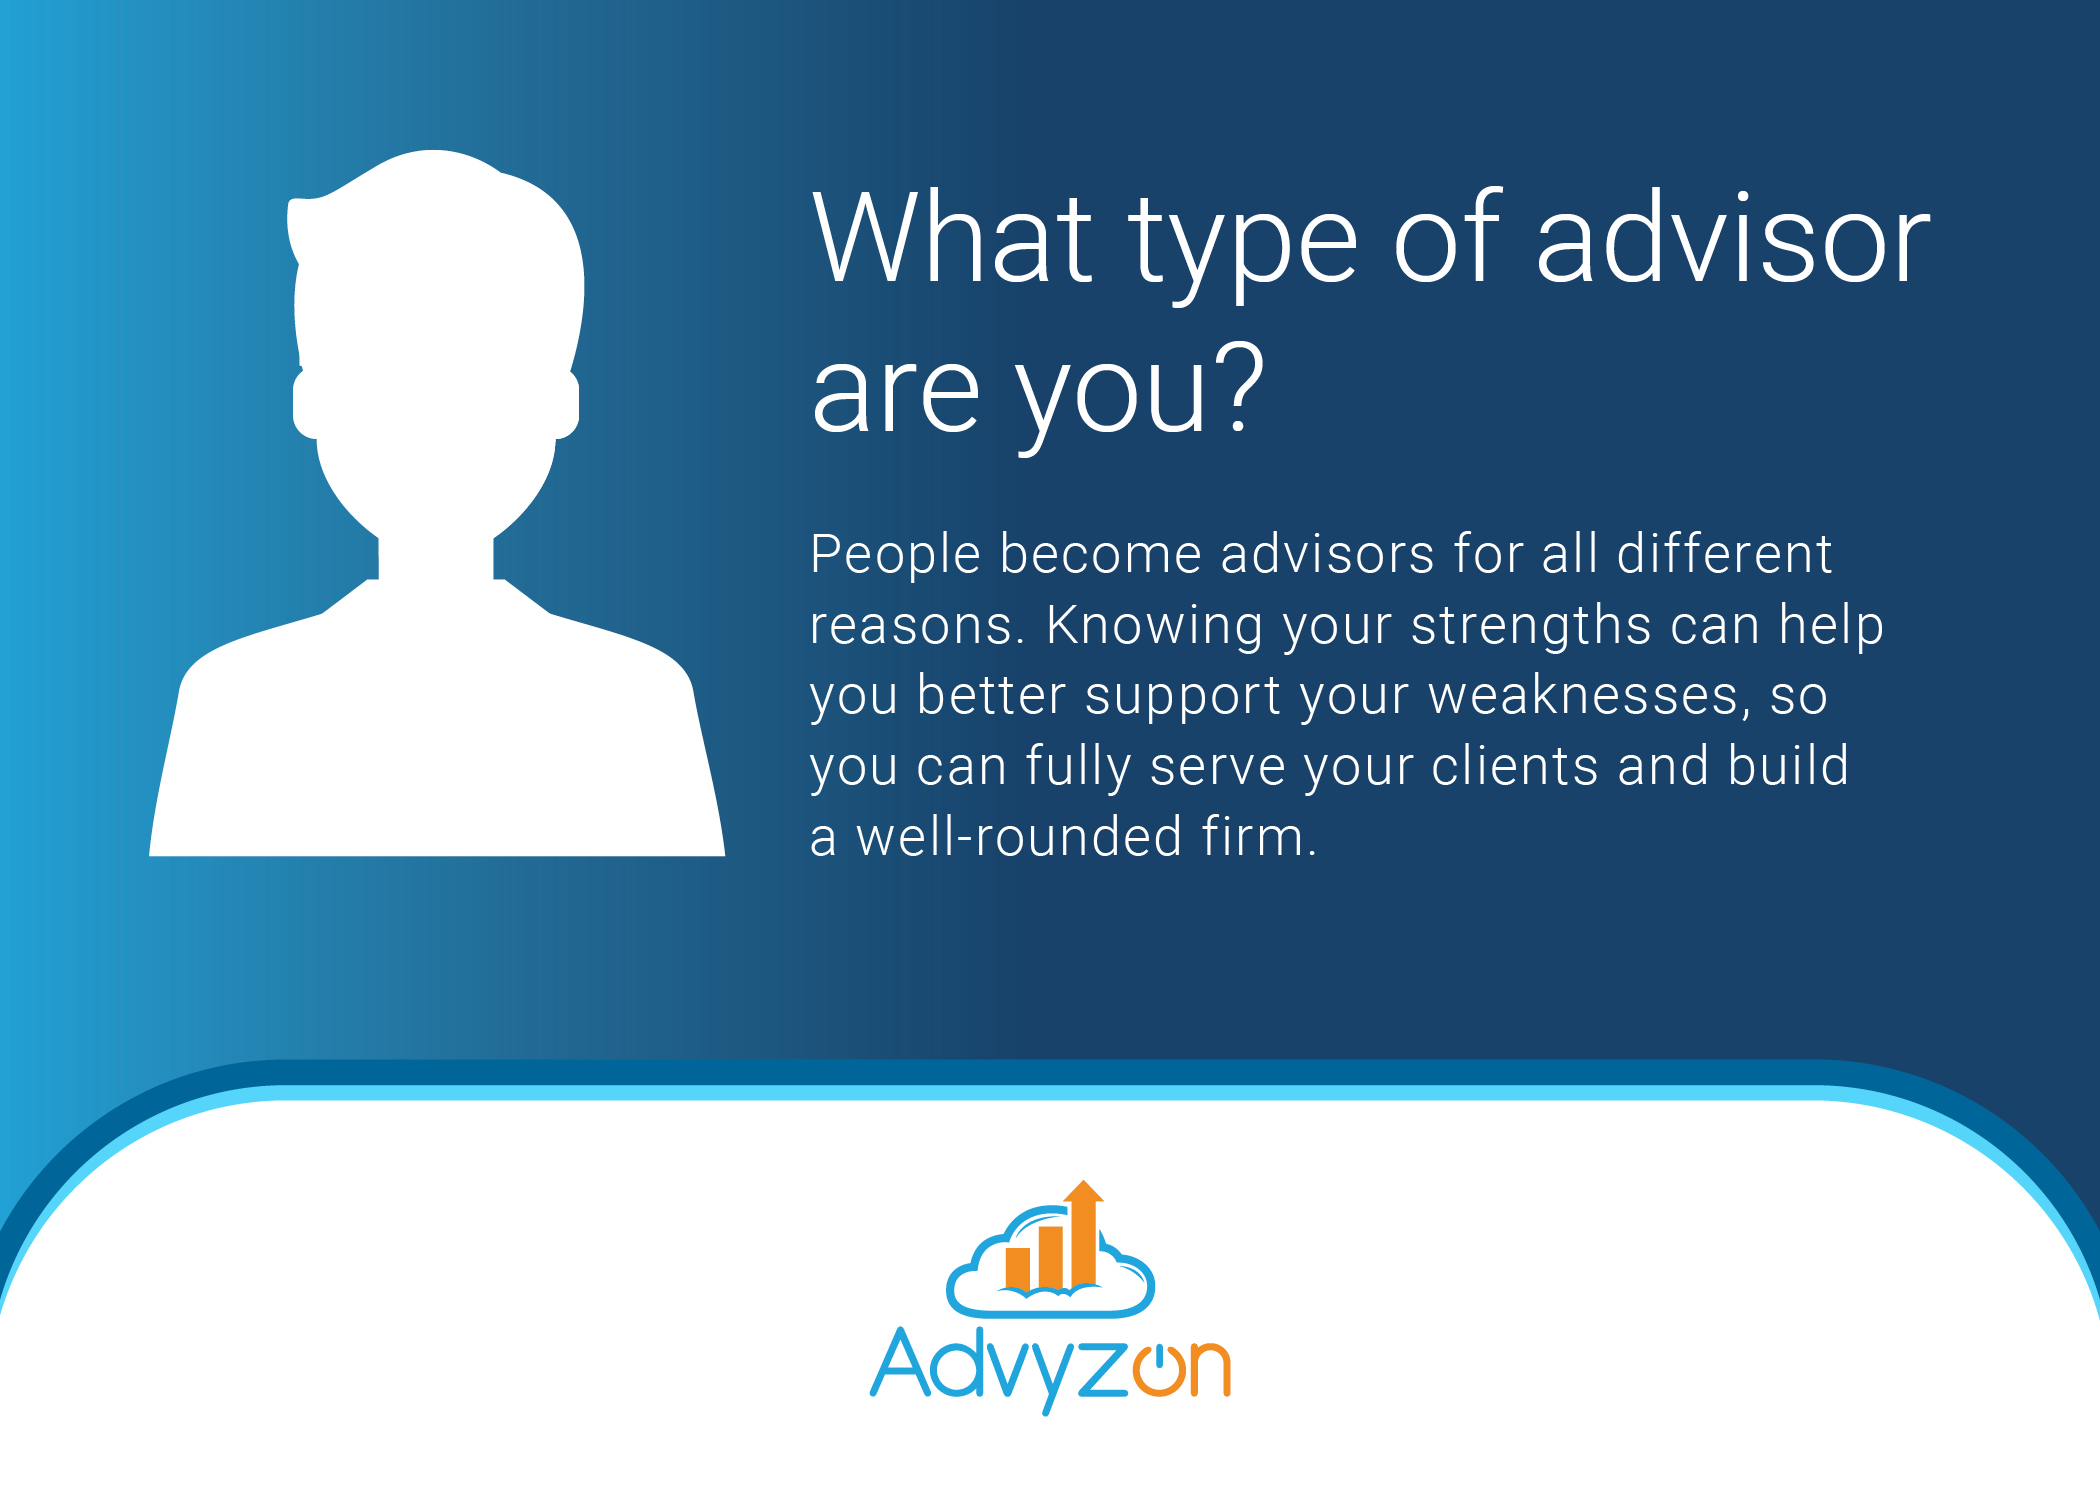 What type of advisor are you?
People become advisors for all different reasons. Knowing your strengths can help you better support your weaknesses, so you can fully serve your clients and build a well-rounded firm.